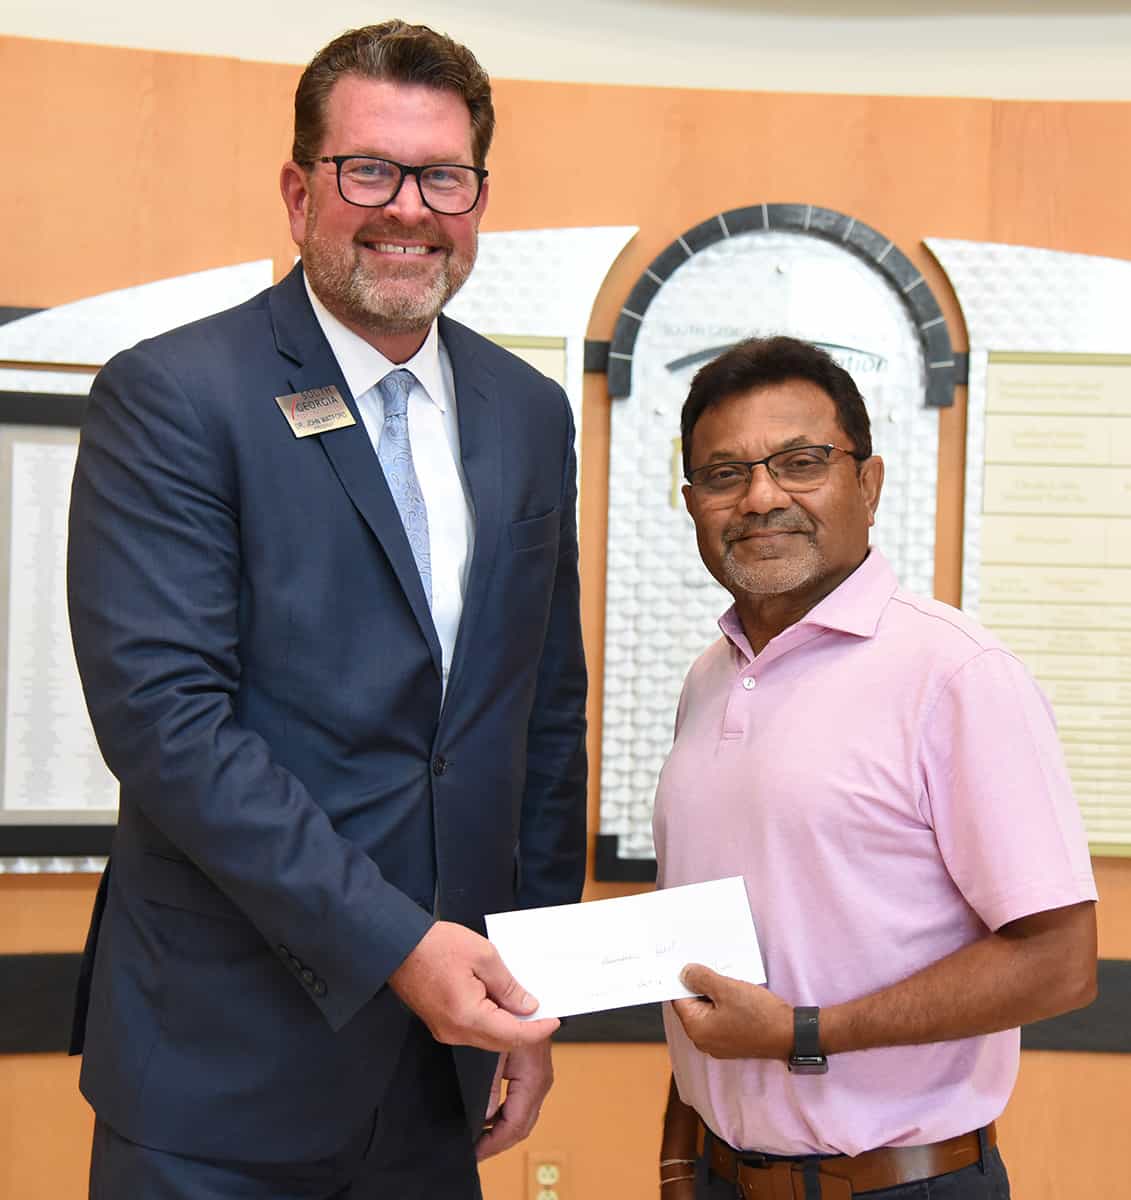 South Georgia Technical College President Dr. John Watford (l) is shown above thanking Sharad Patel for his contributions to the South Georgia Technical College Foundation.